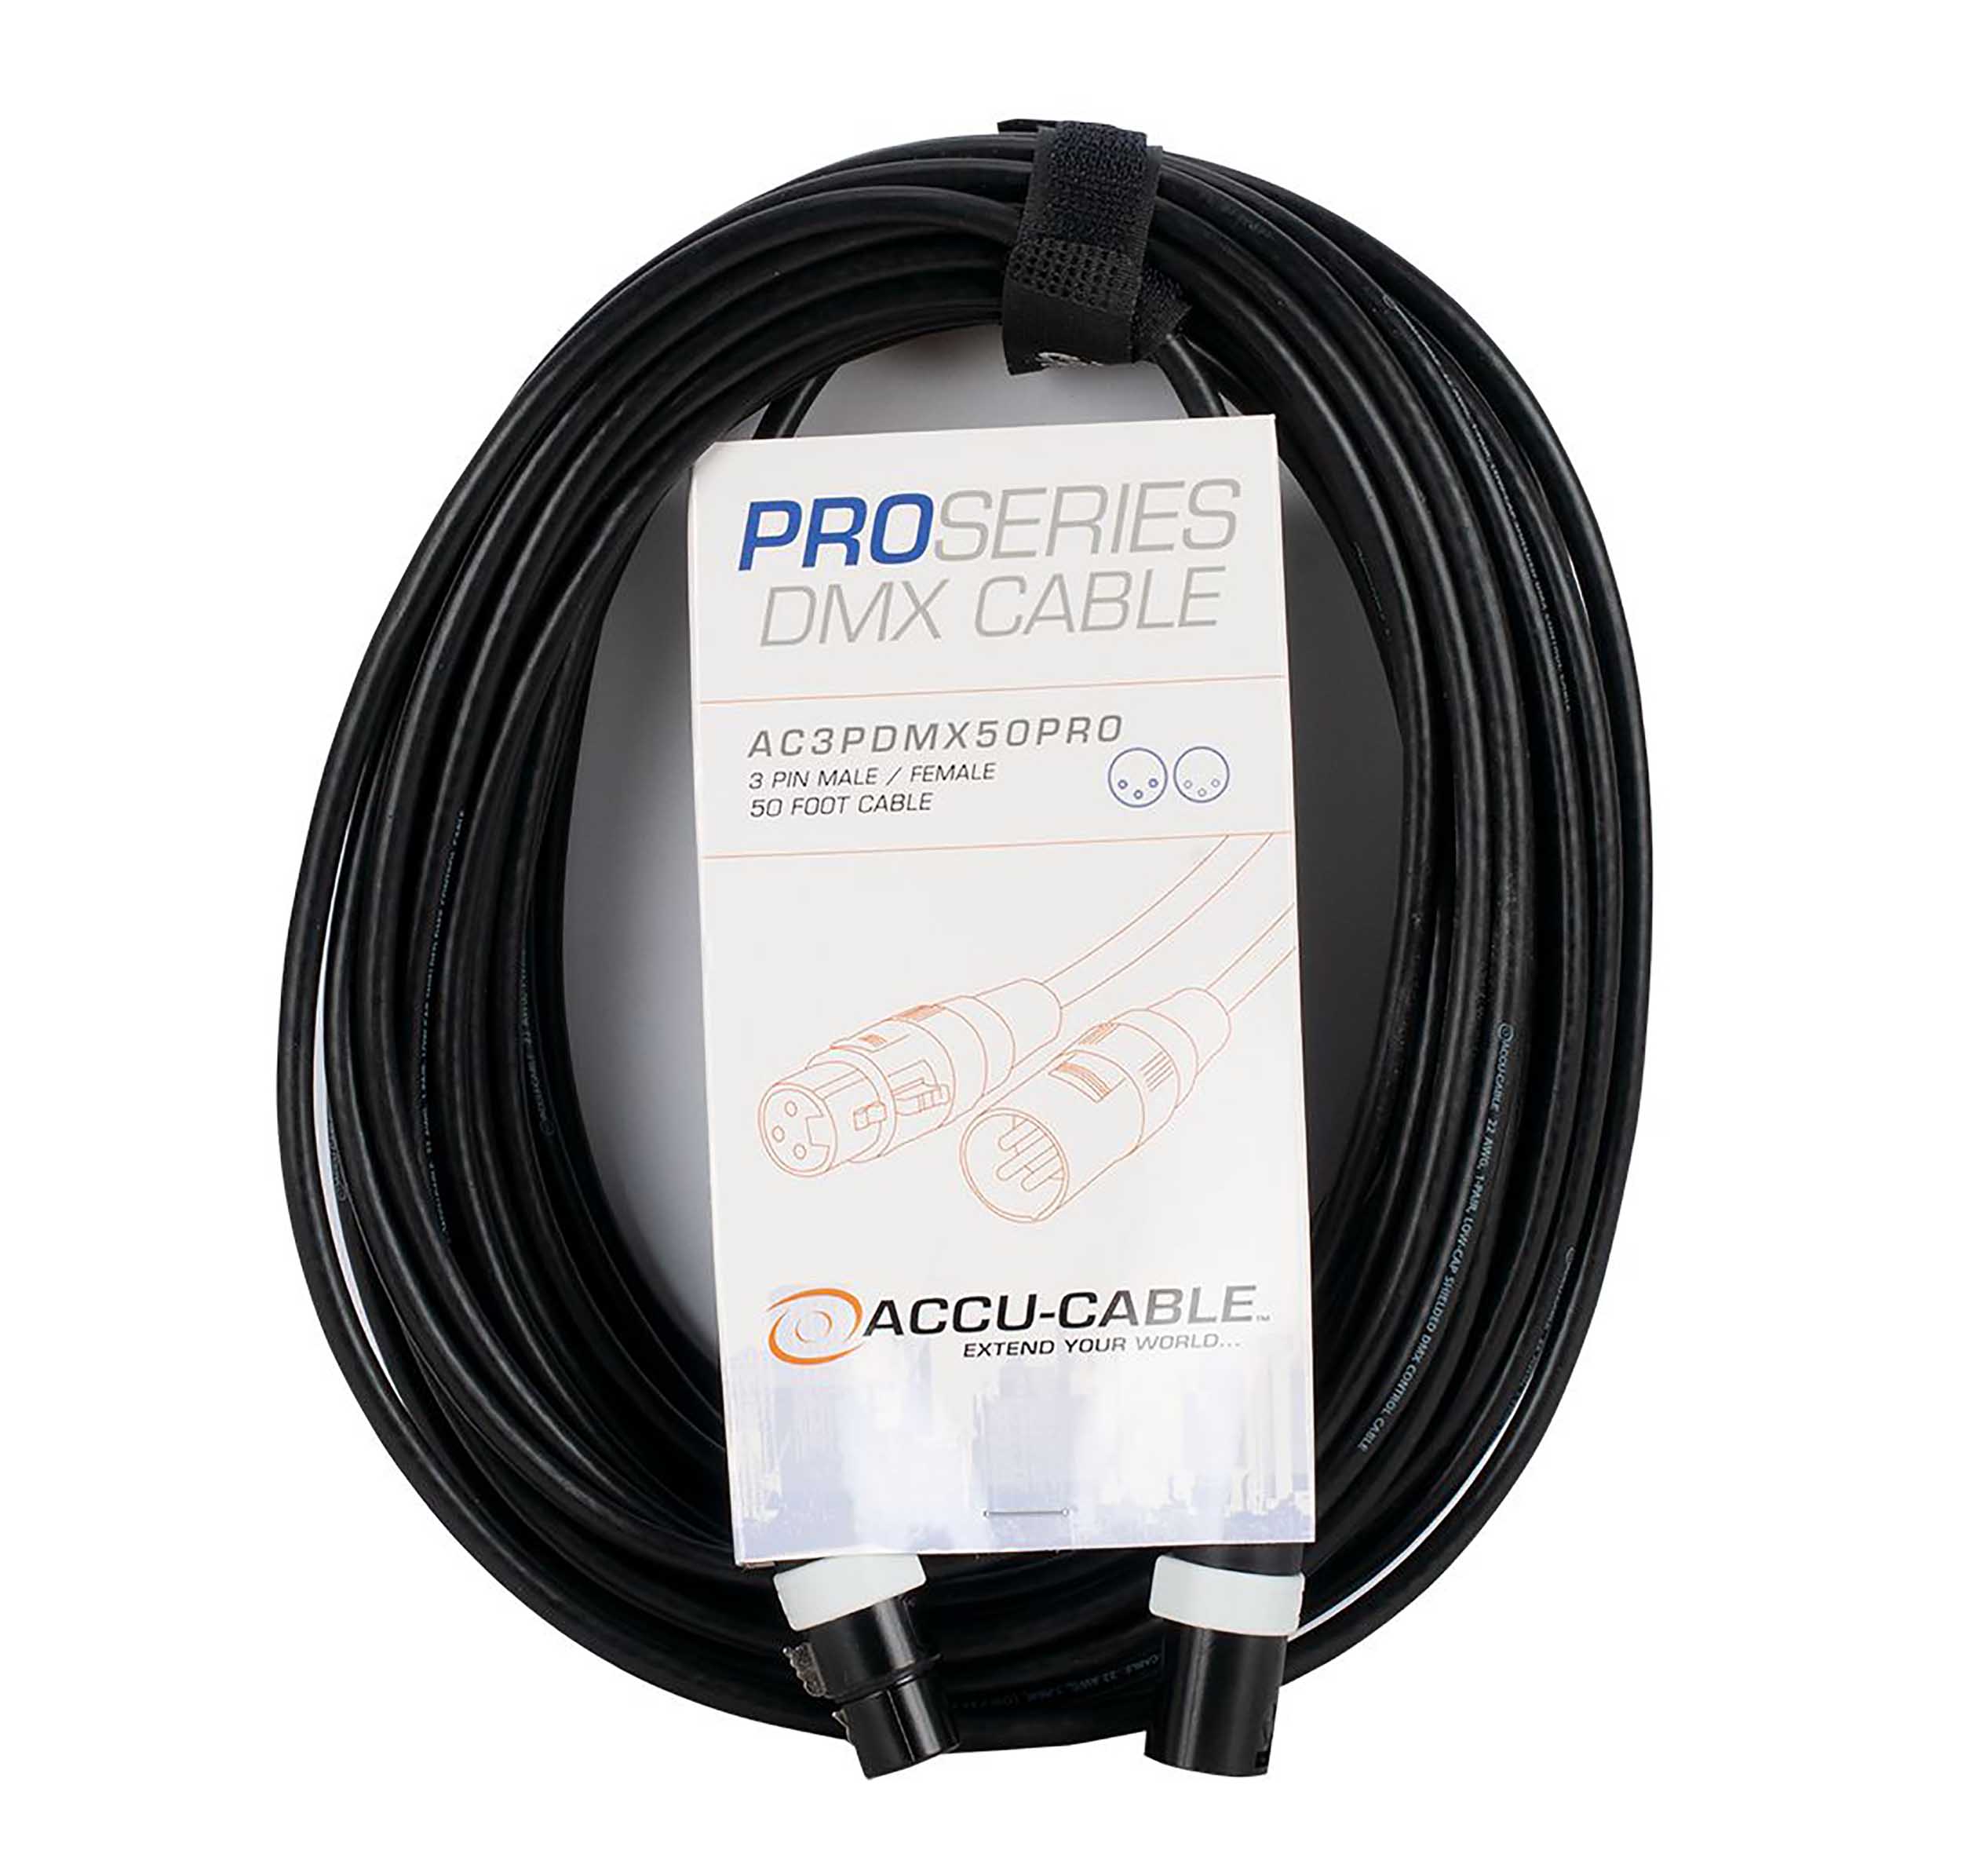 Accu-Cable AC3PDMX50PRO, 3-Pin Male to 3-Pin Female DMX Cable - 50 Ft by Accu Cable